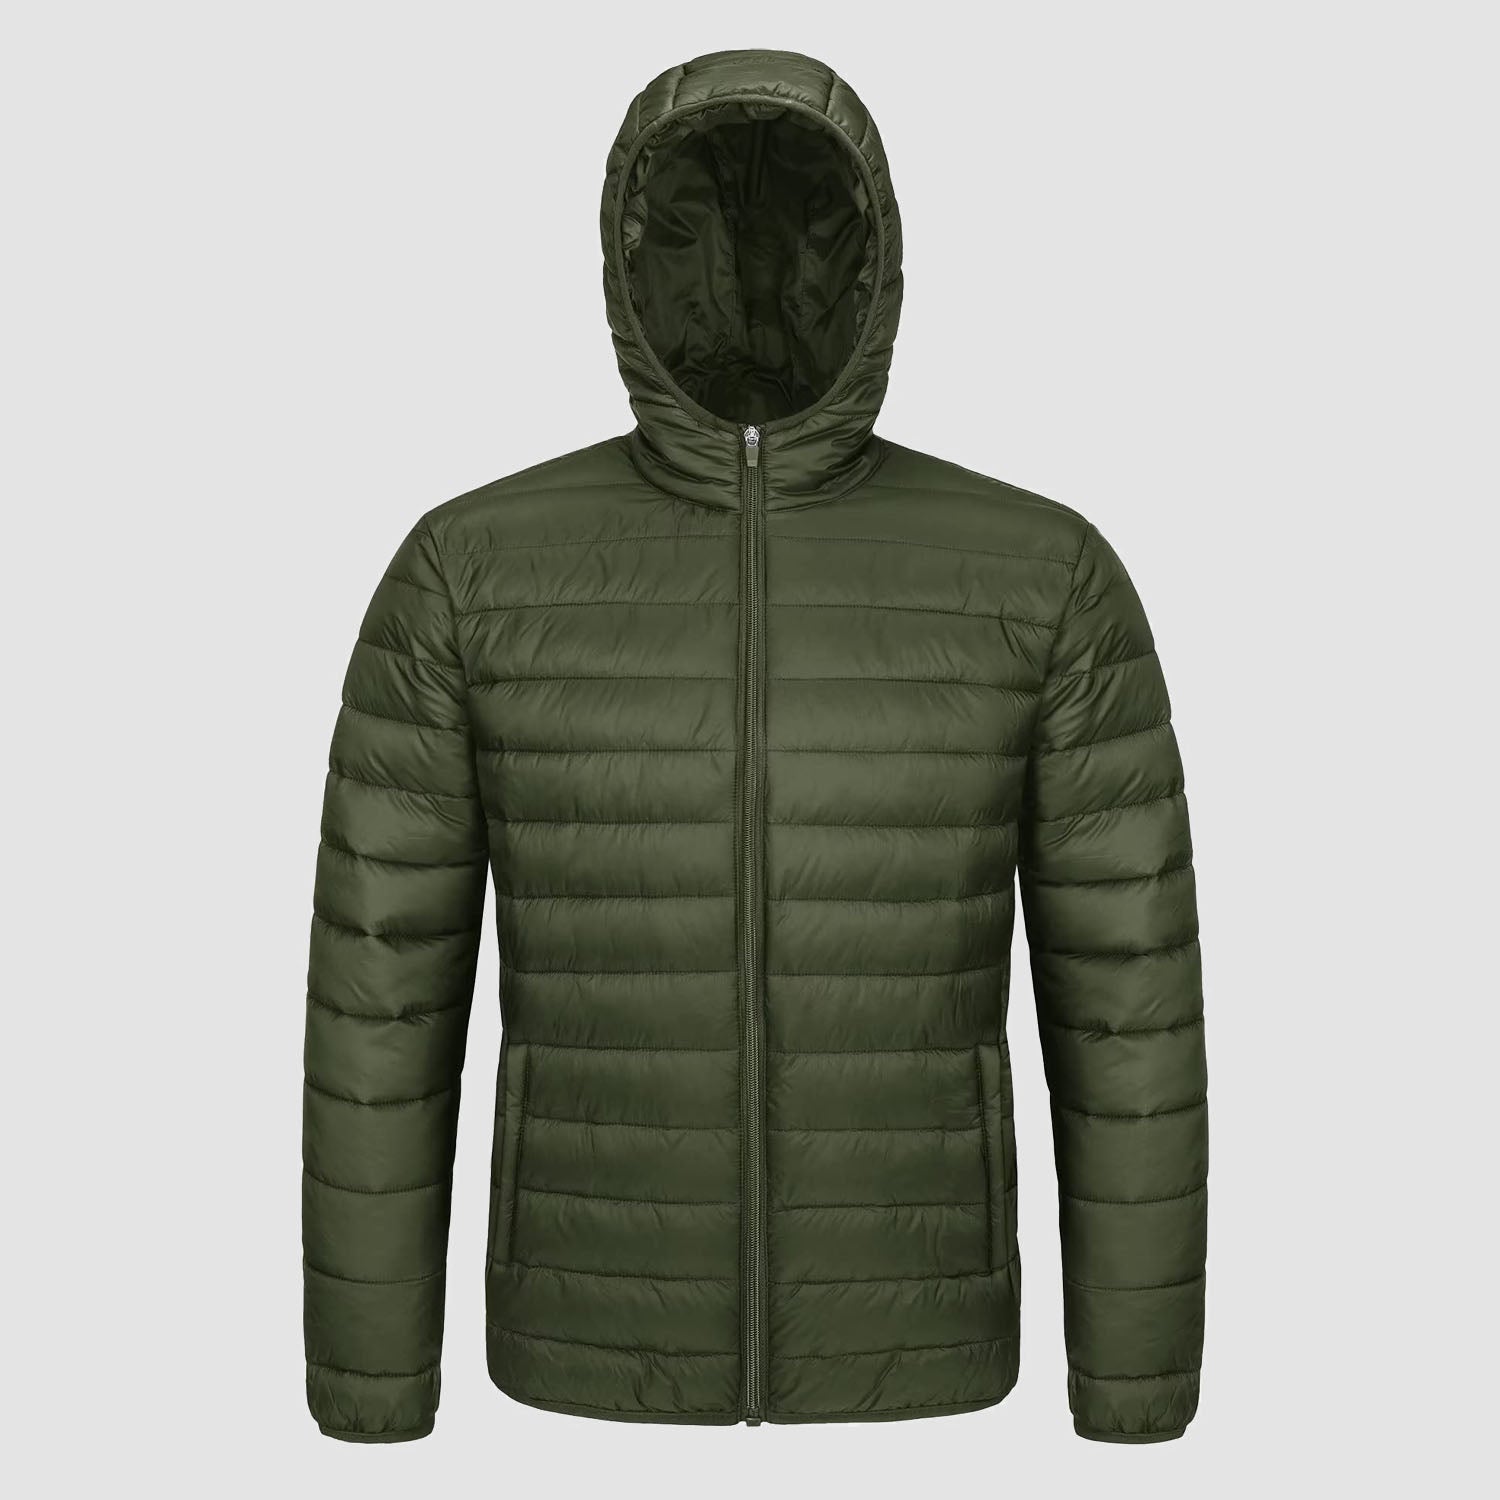 Men's Lightweight Puffer Jacket Hooded Quilted Lined Winter Coat